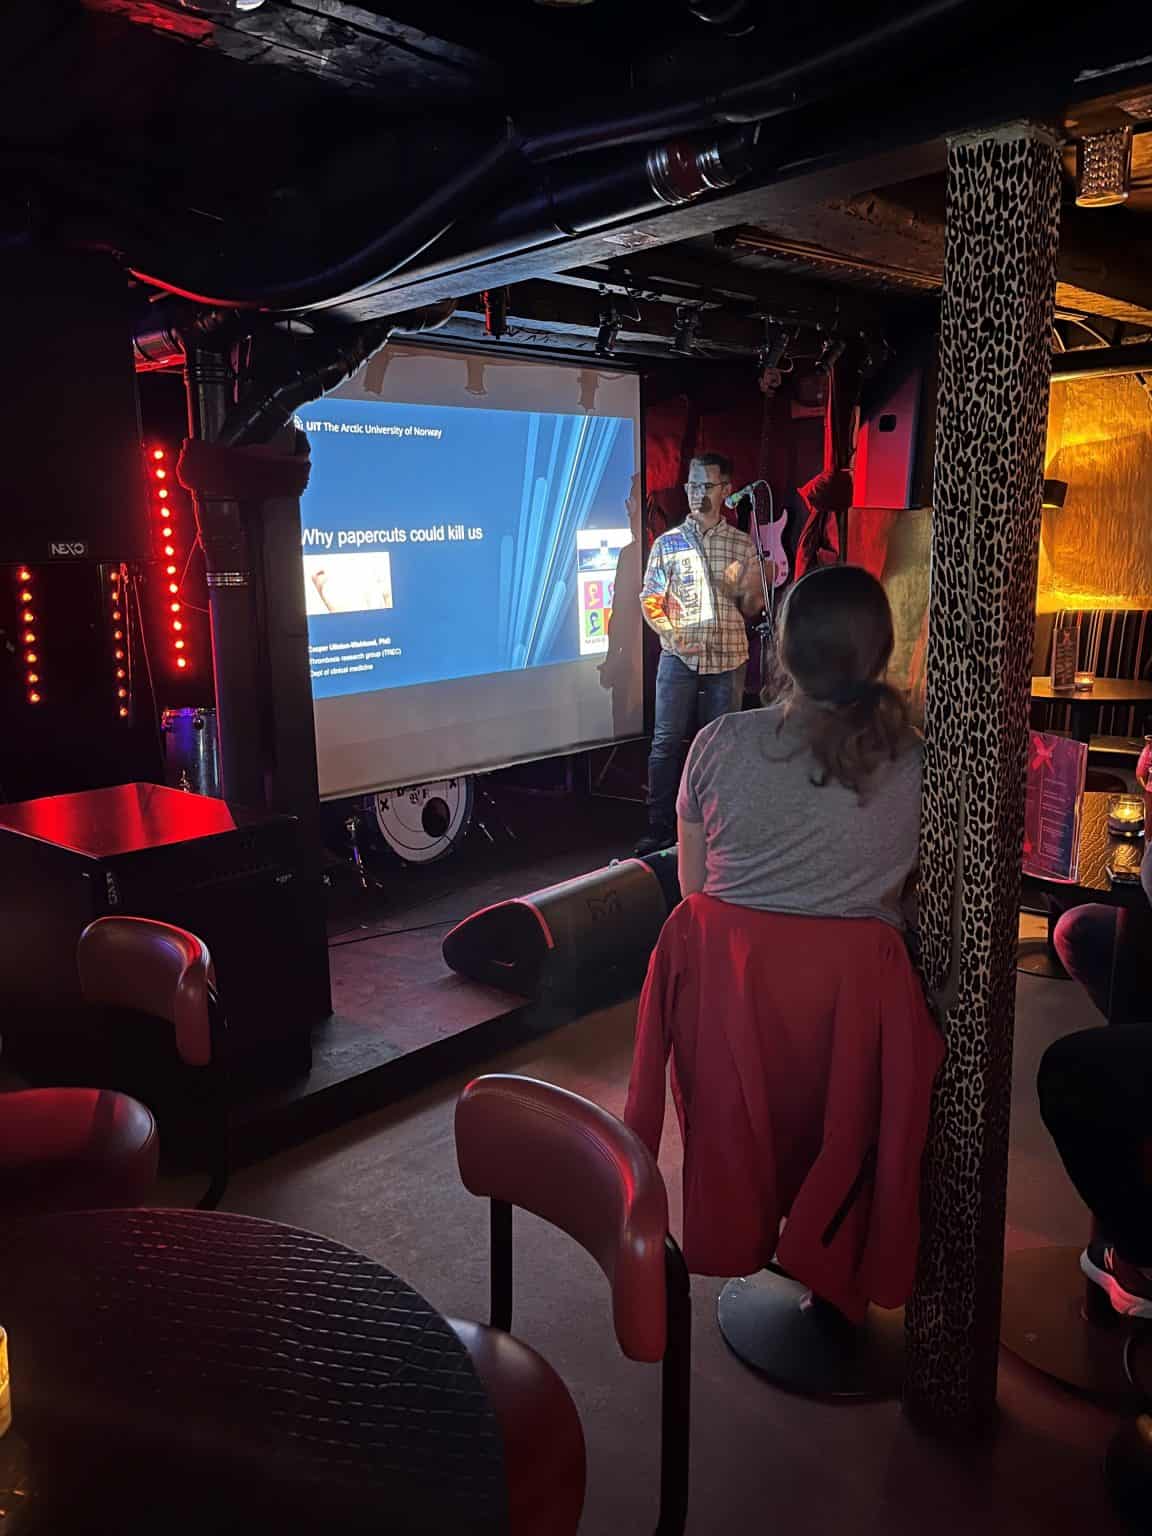 A scientist presents his work in a pub in Tromso.